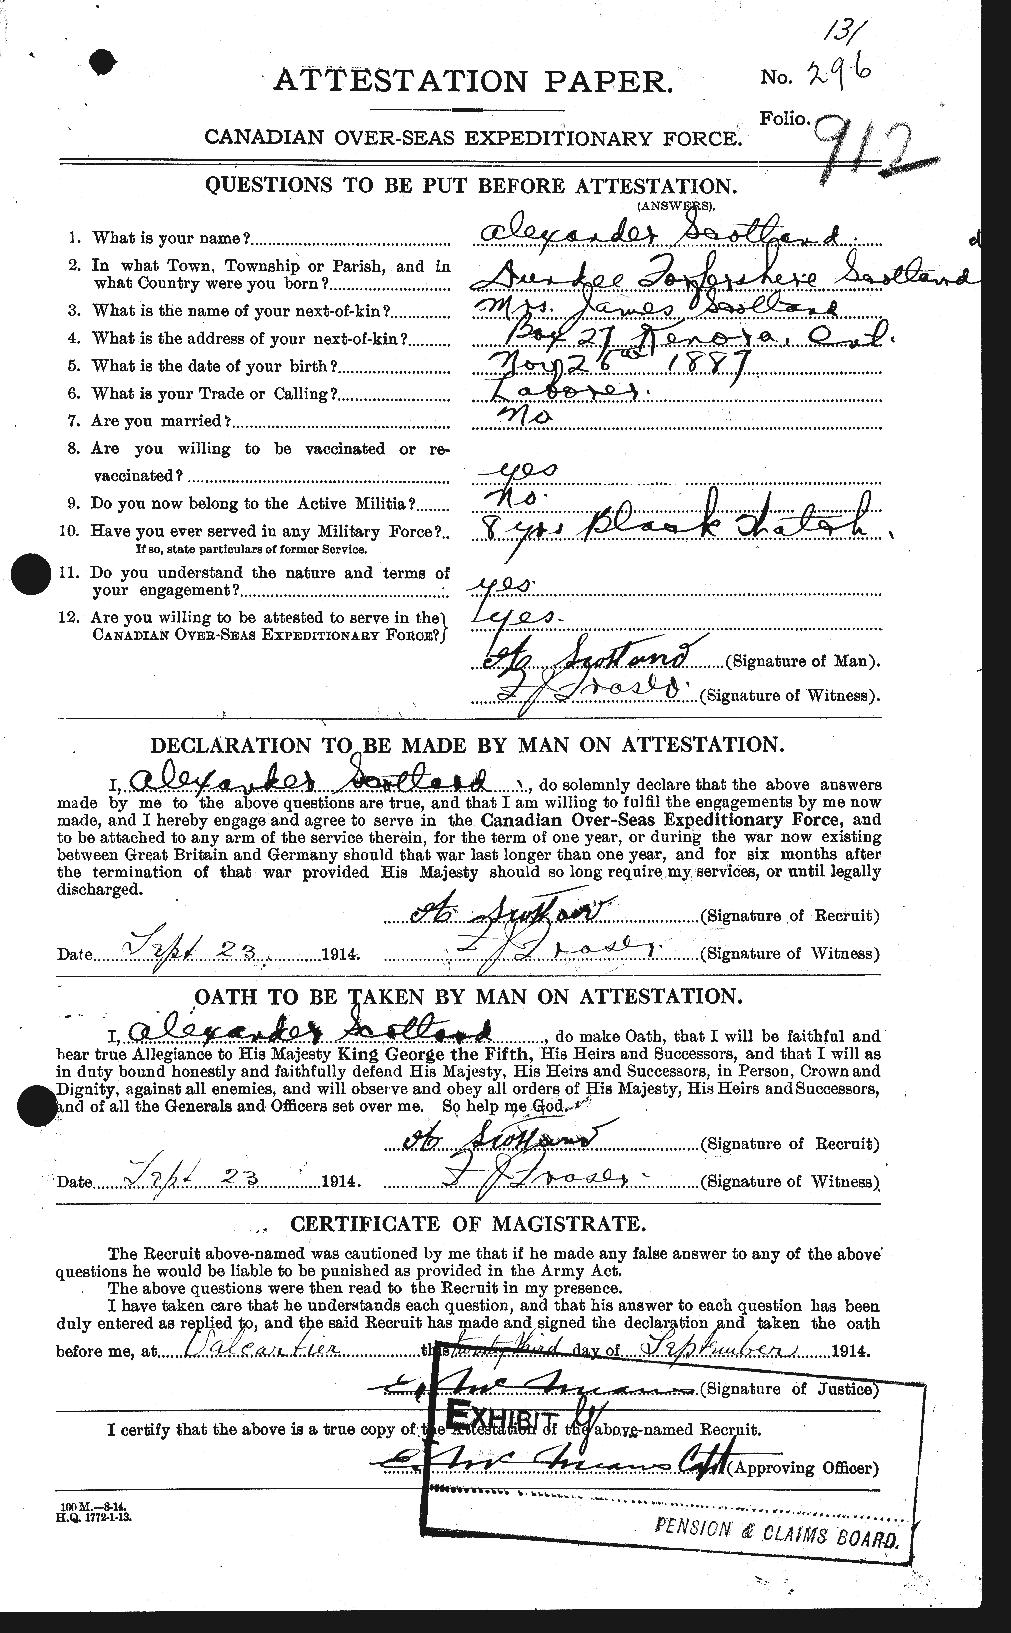 Personnel Records of the First World War - CEF 079304a